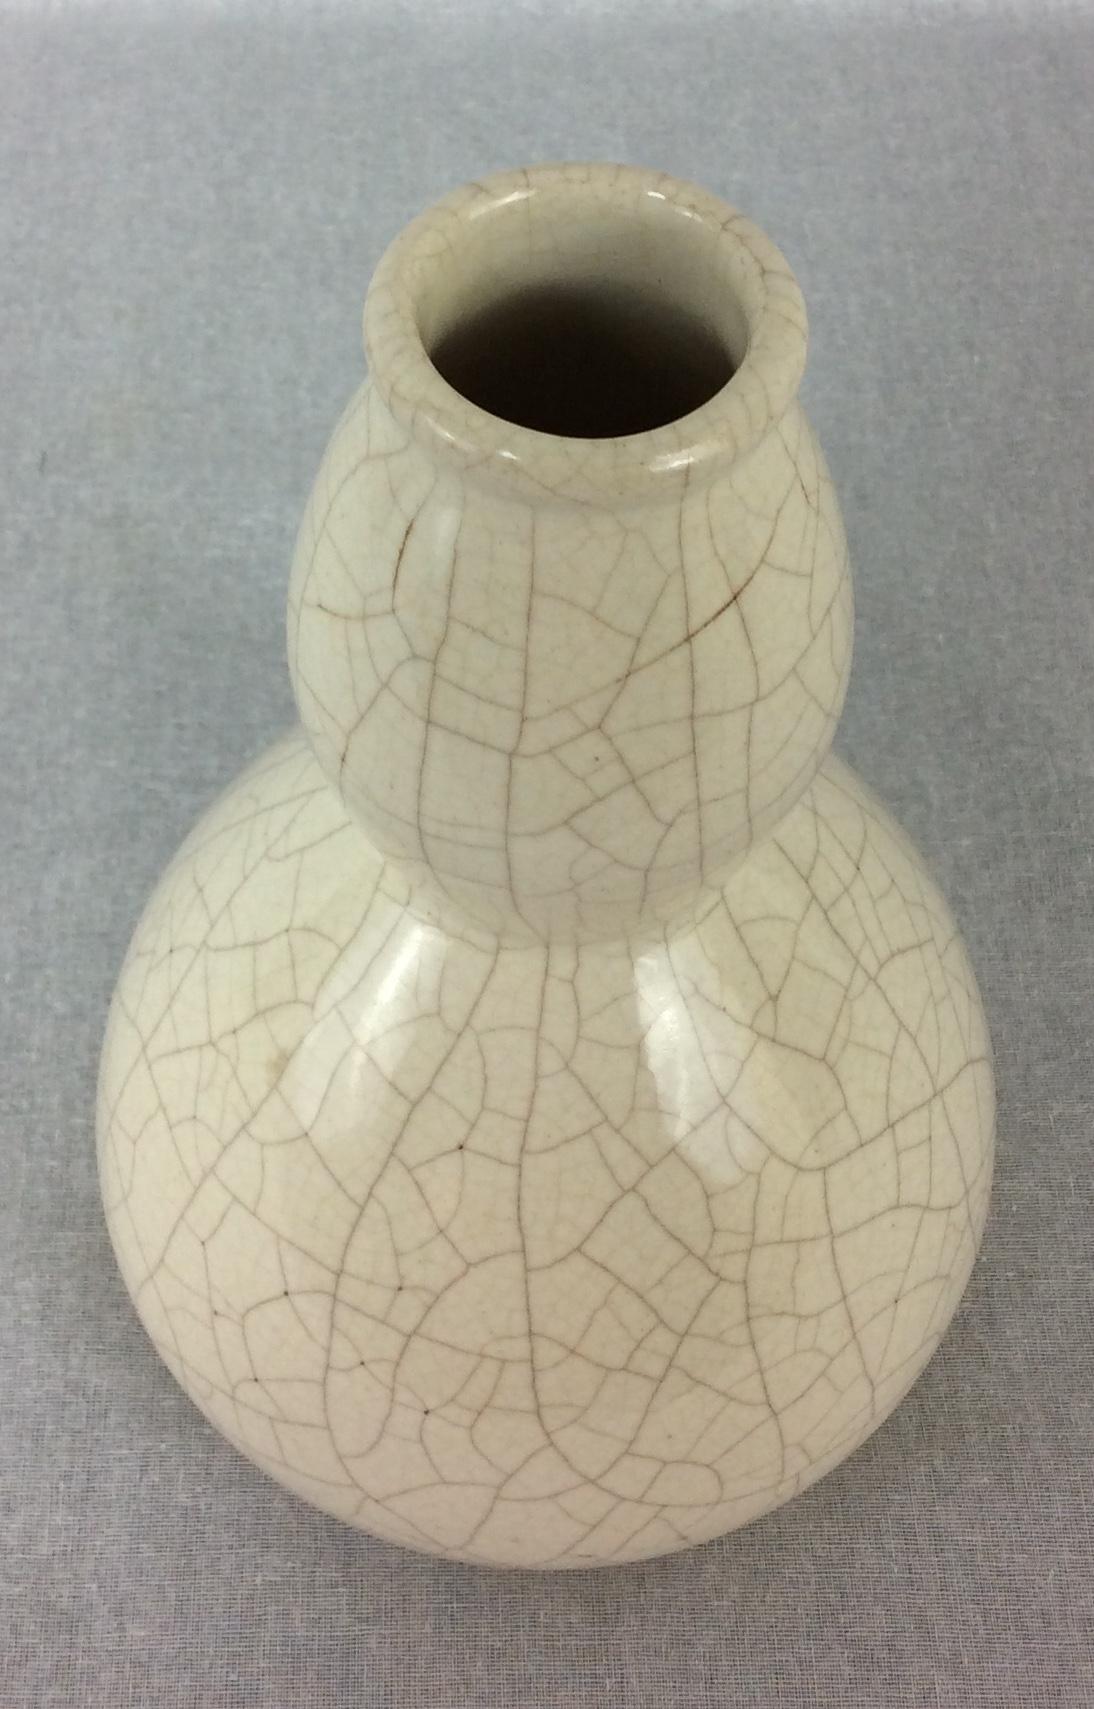 Stunning Art Deco vase by Saint Clement, France. Ceramic vase with white crackle glaze finish. Features an elongated squash shape with narrow opening in a stylized pattern. The crackle clear glaze was a popular technique for animal and figural